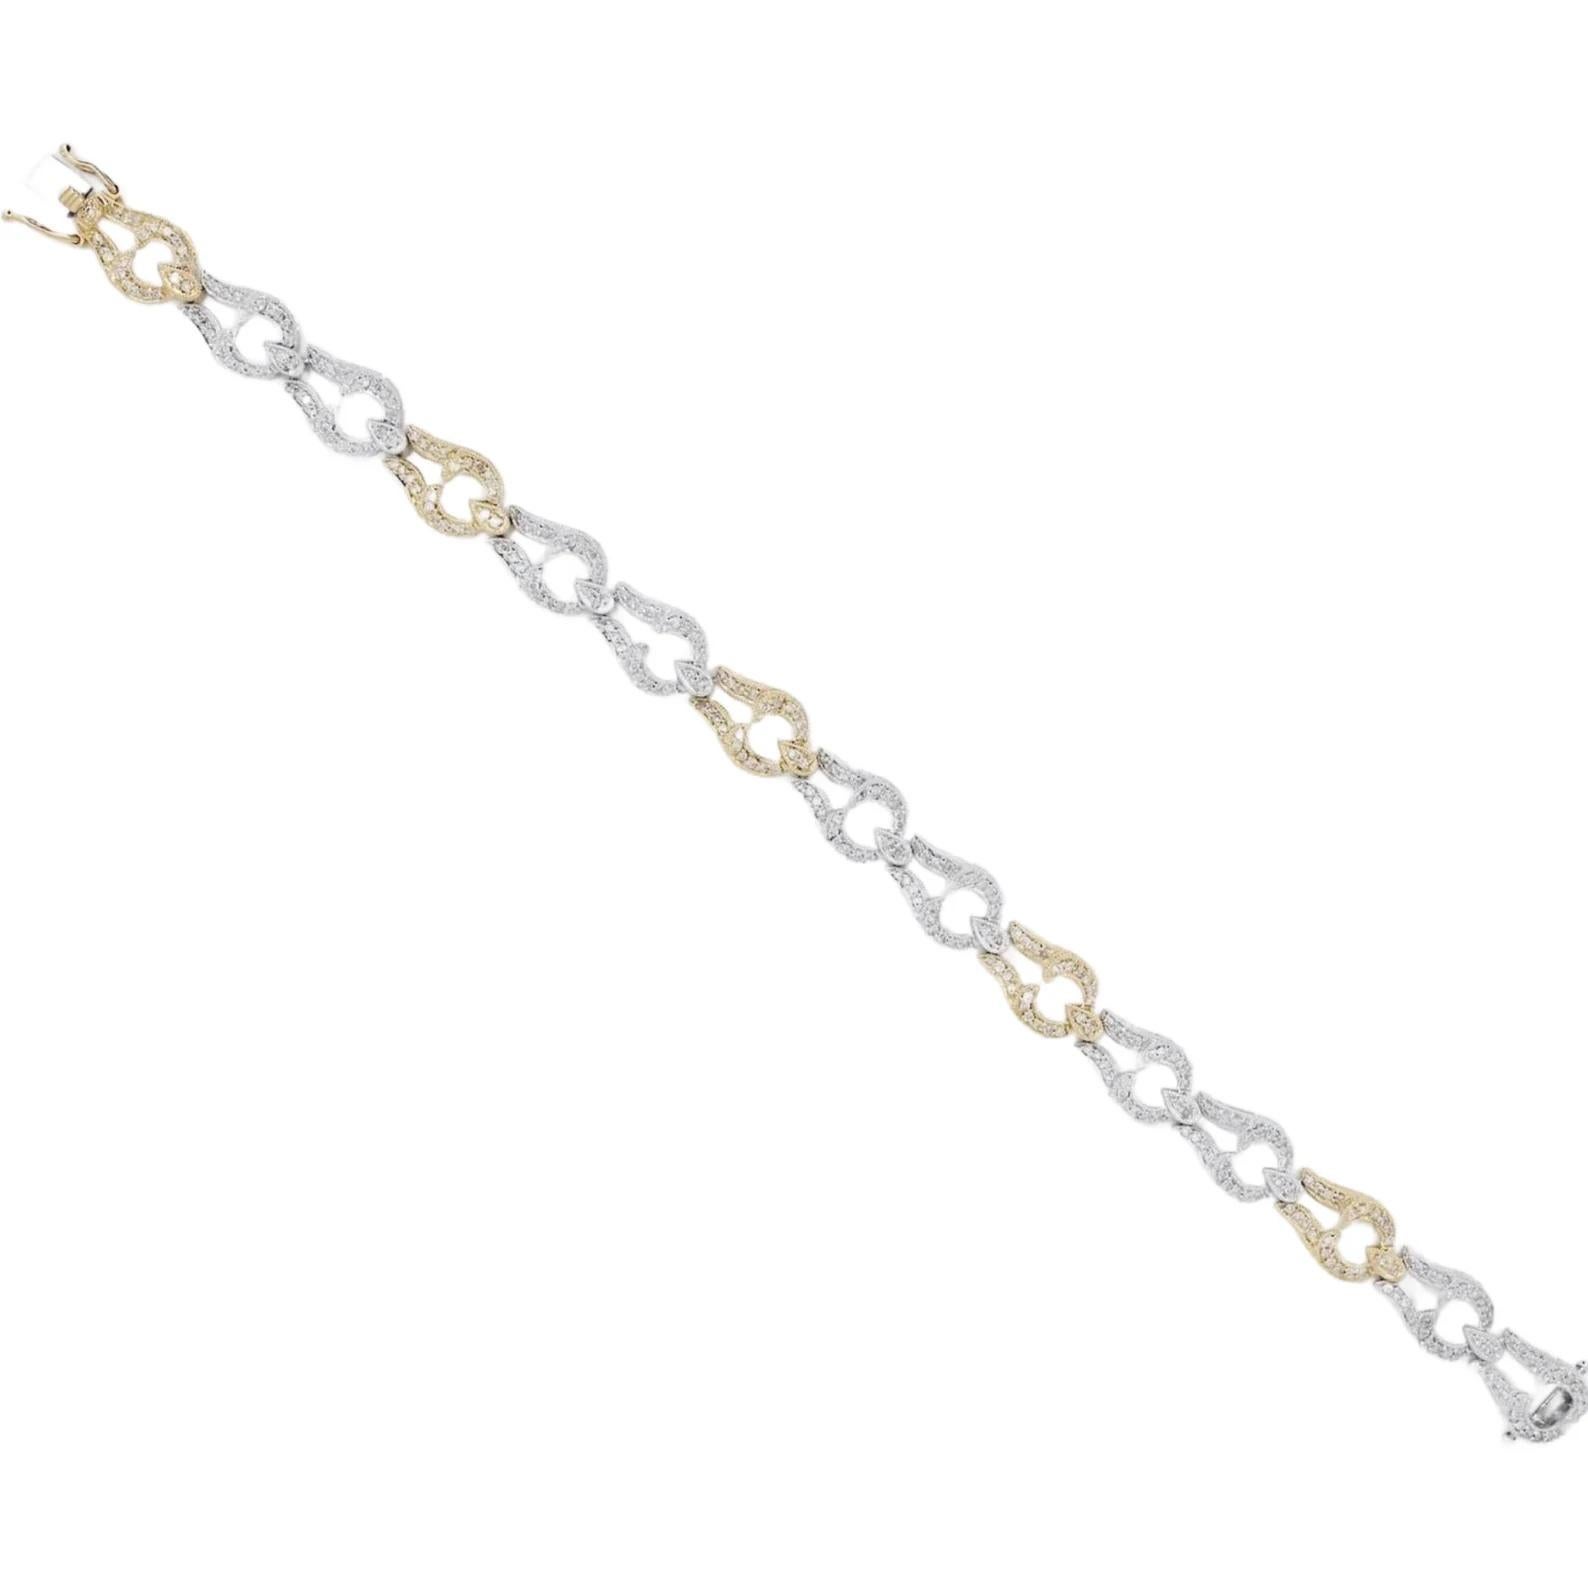 Round Cut Two Tone Fancy Yellow & Colorless Pave Diamond Bracelet in 18K Gold For Sale